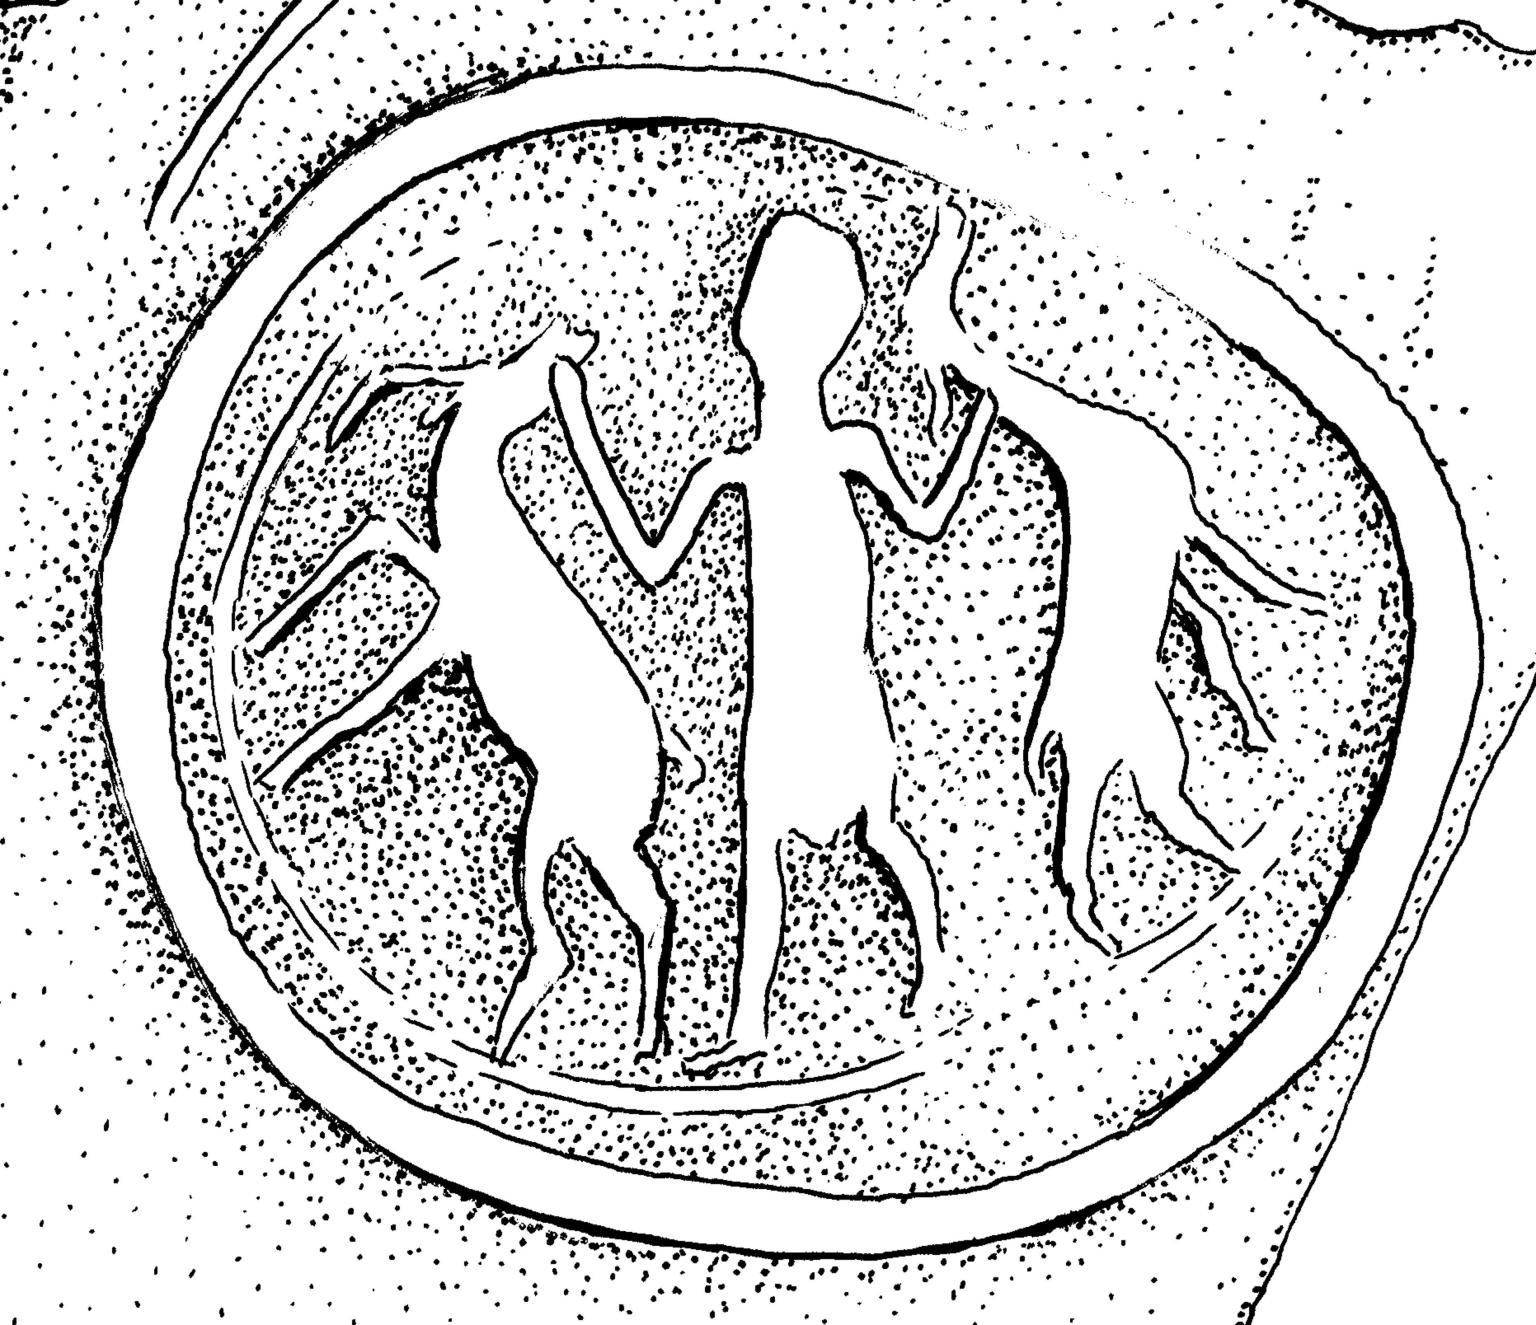 Drawing of seal impression with figure holding two ibex-like animals.